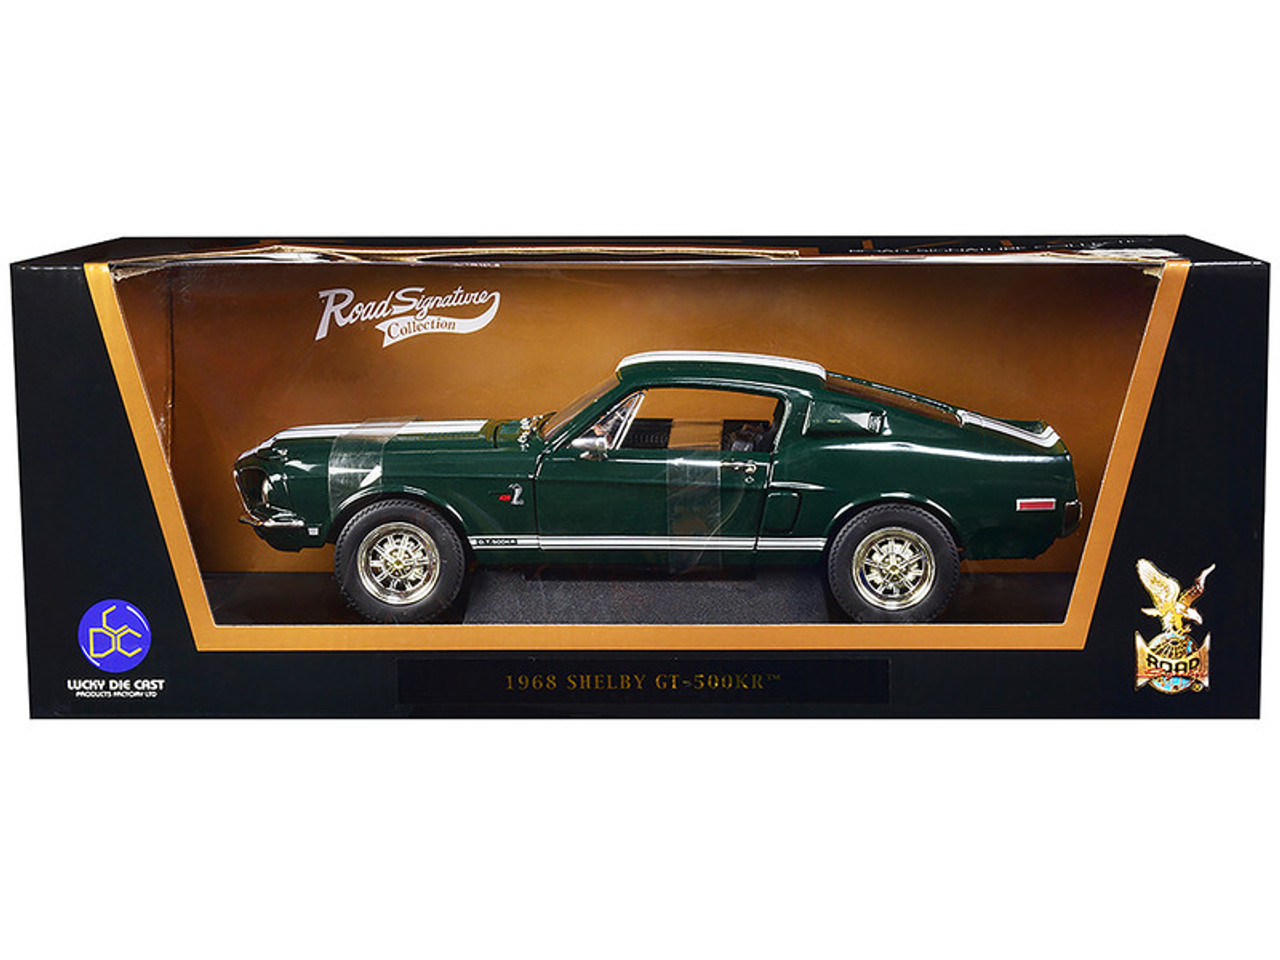 1/18 Road Signature 1968 Shelby GT500 KR (Dark Green with White Stripes) Diecast Car Model